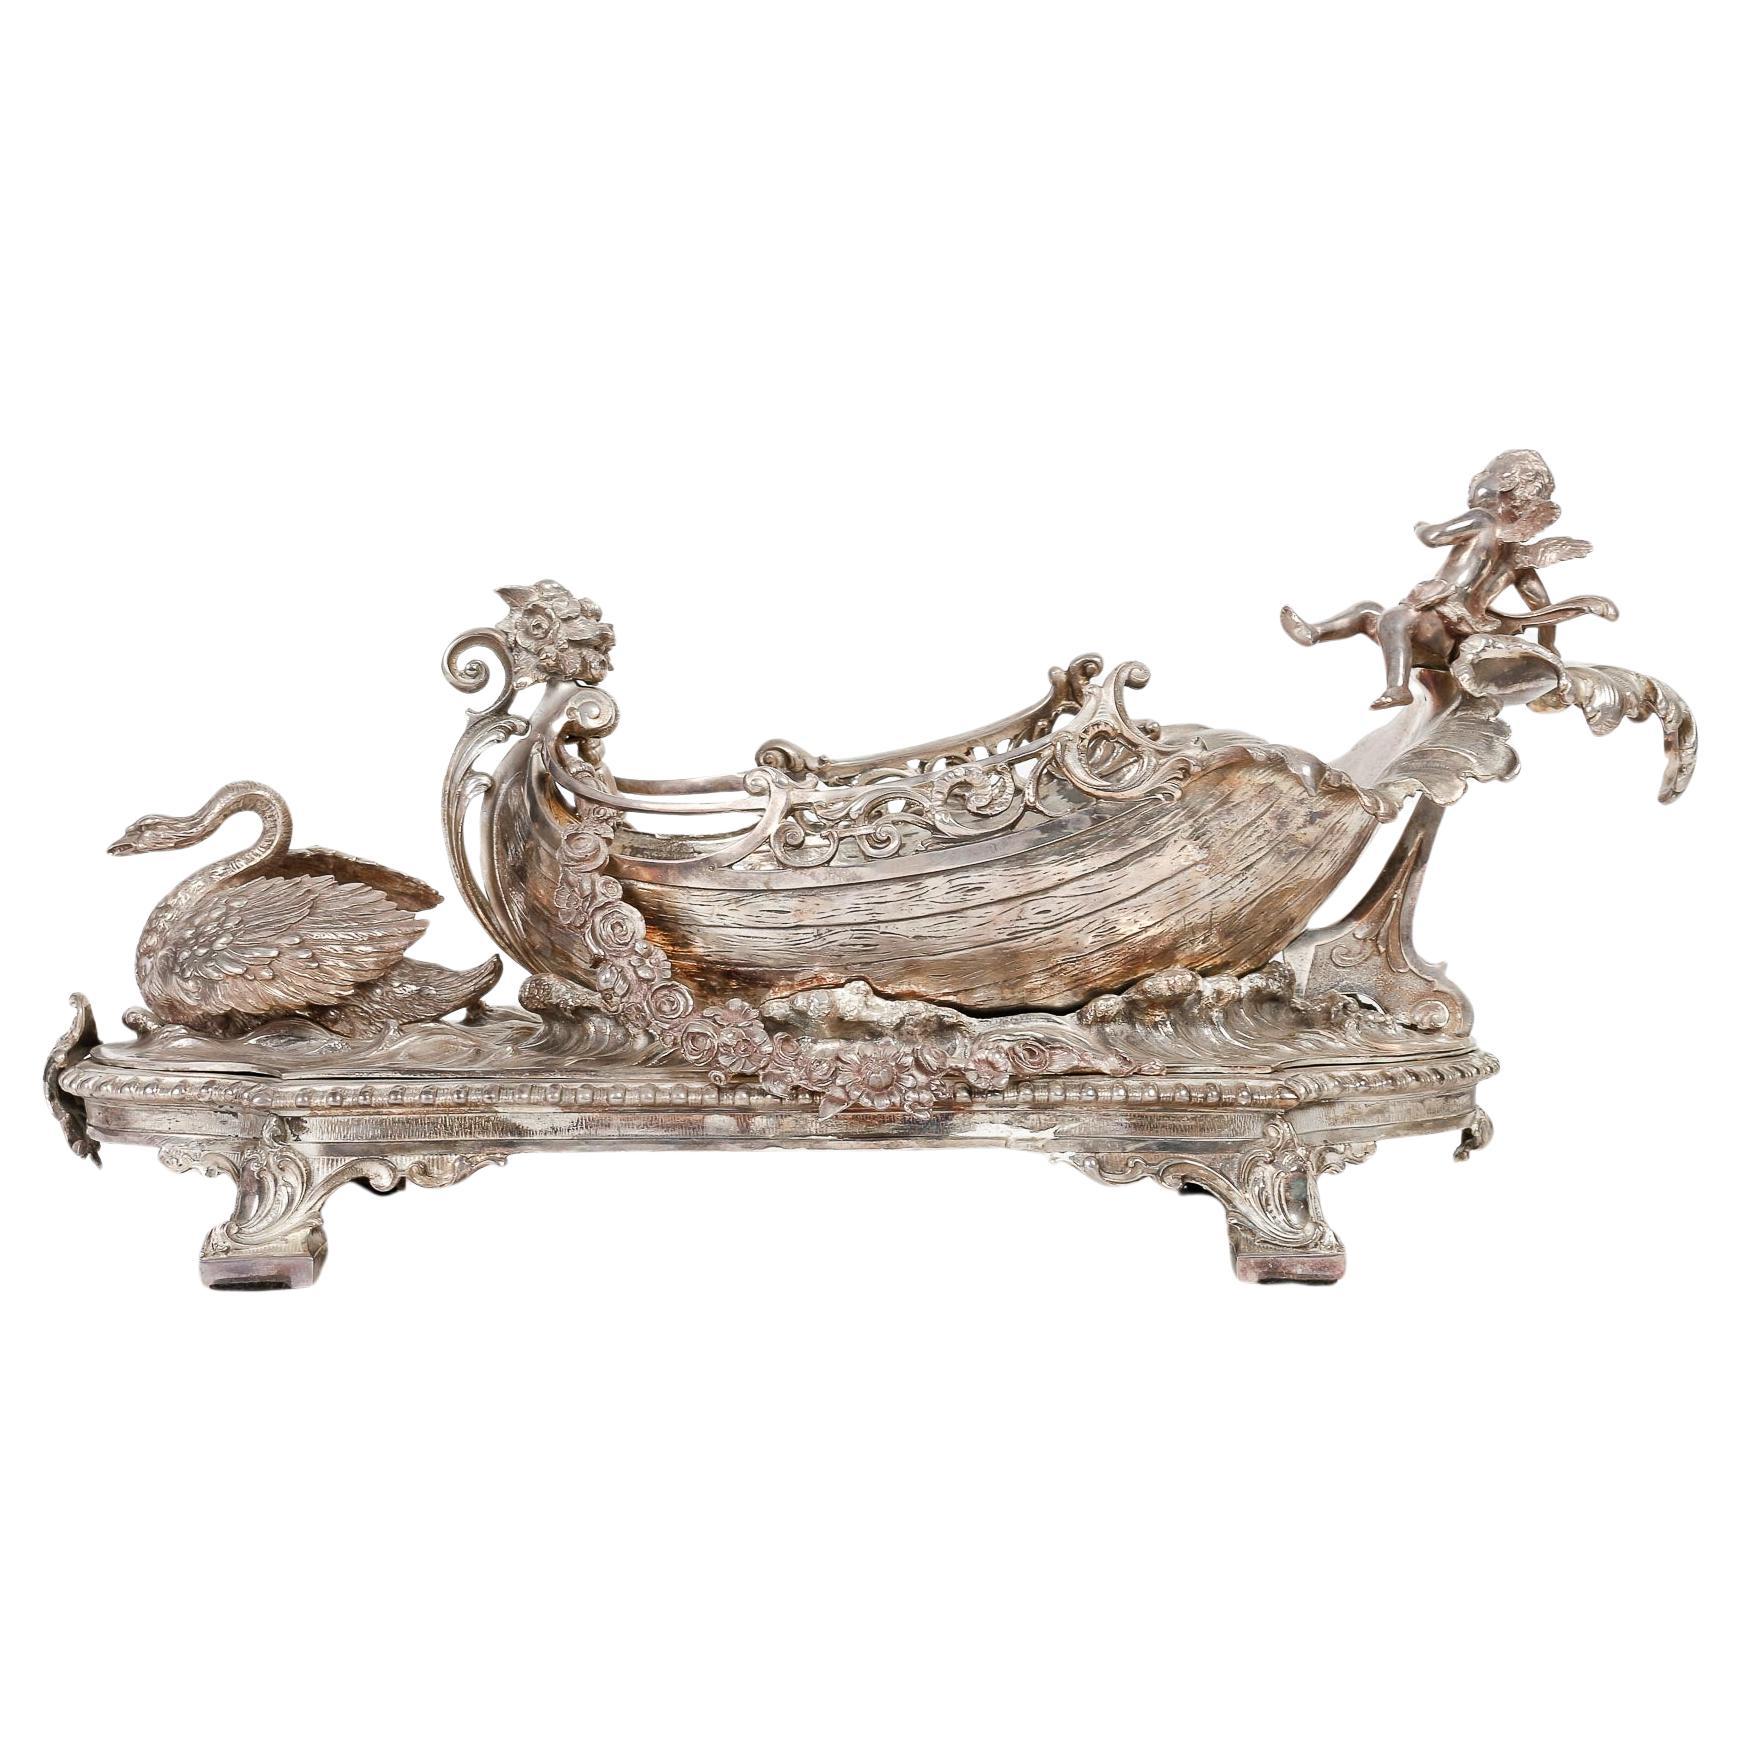 Silver Plated Metal Fruit Bowl, Centerpiece, 19th Century, Napoleon III Period.